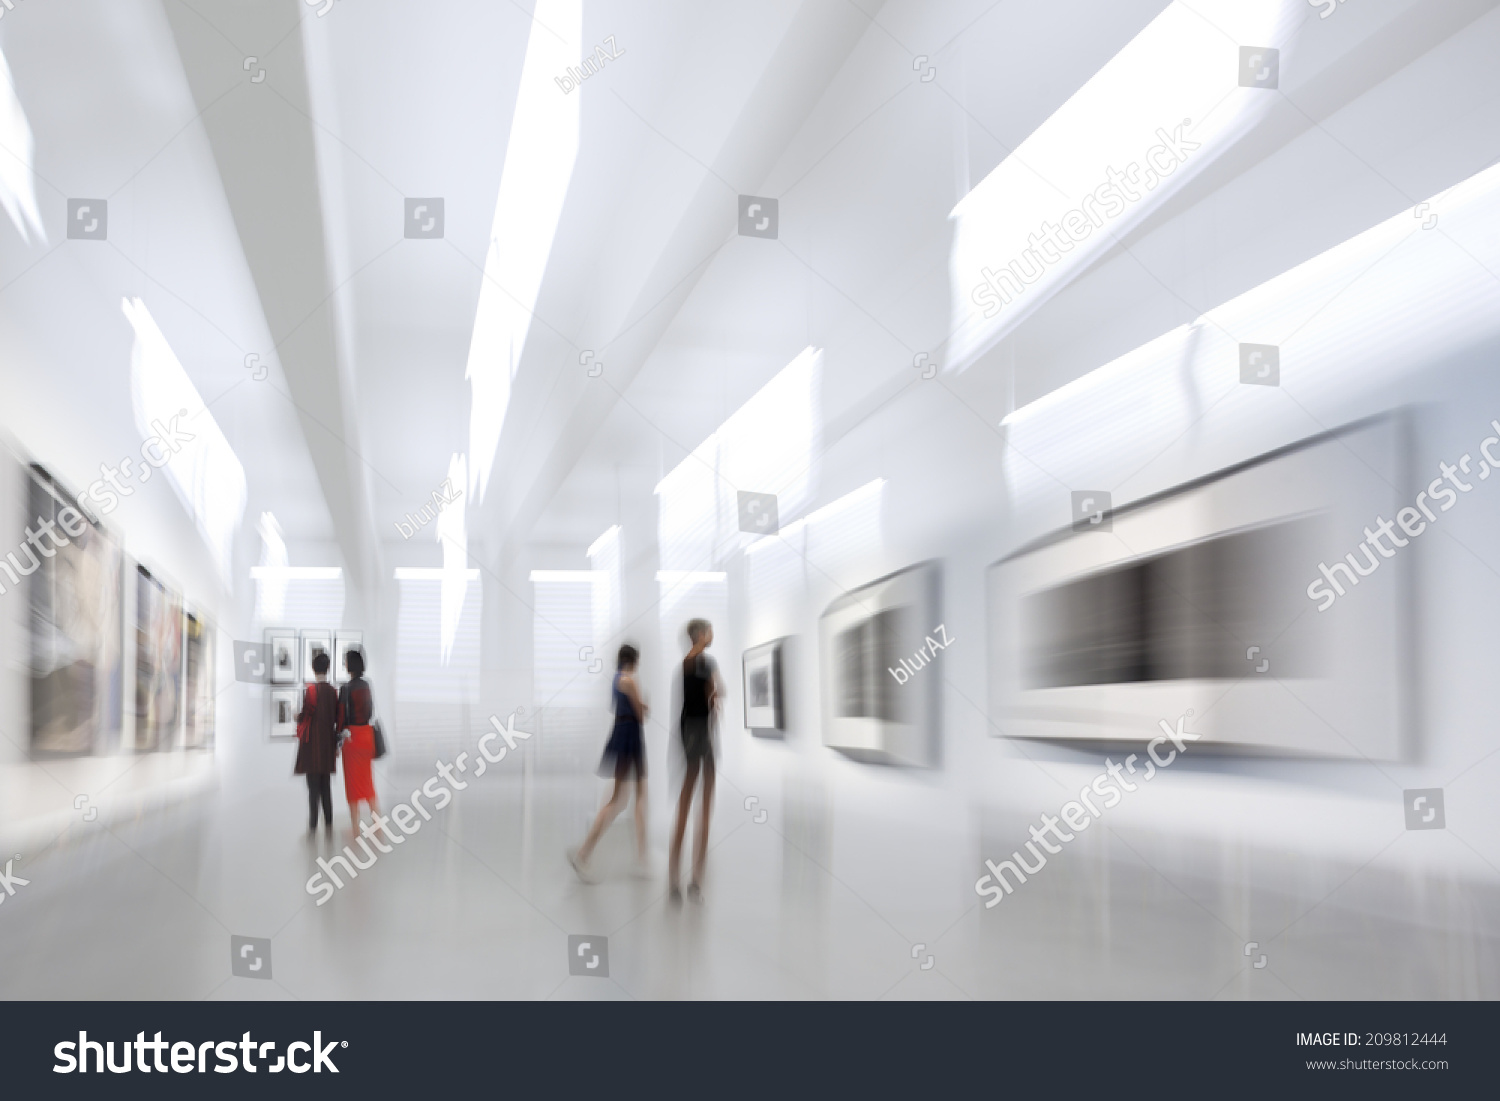 abstract image of people in the lobby of a modern art center with a blurred background #209812444